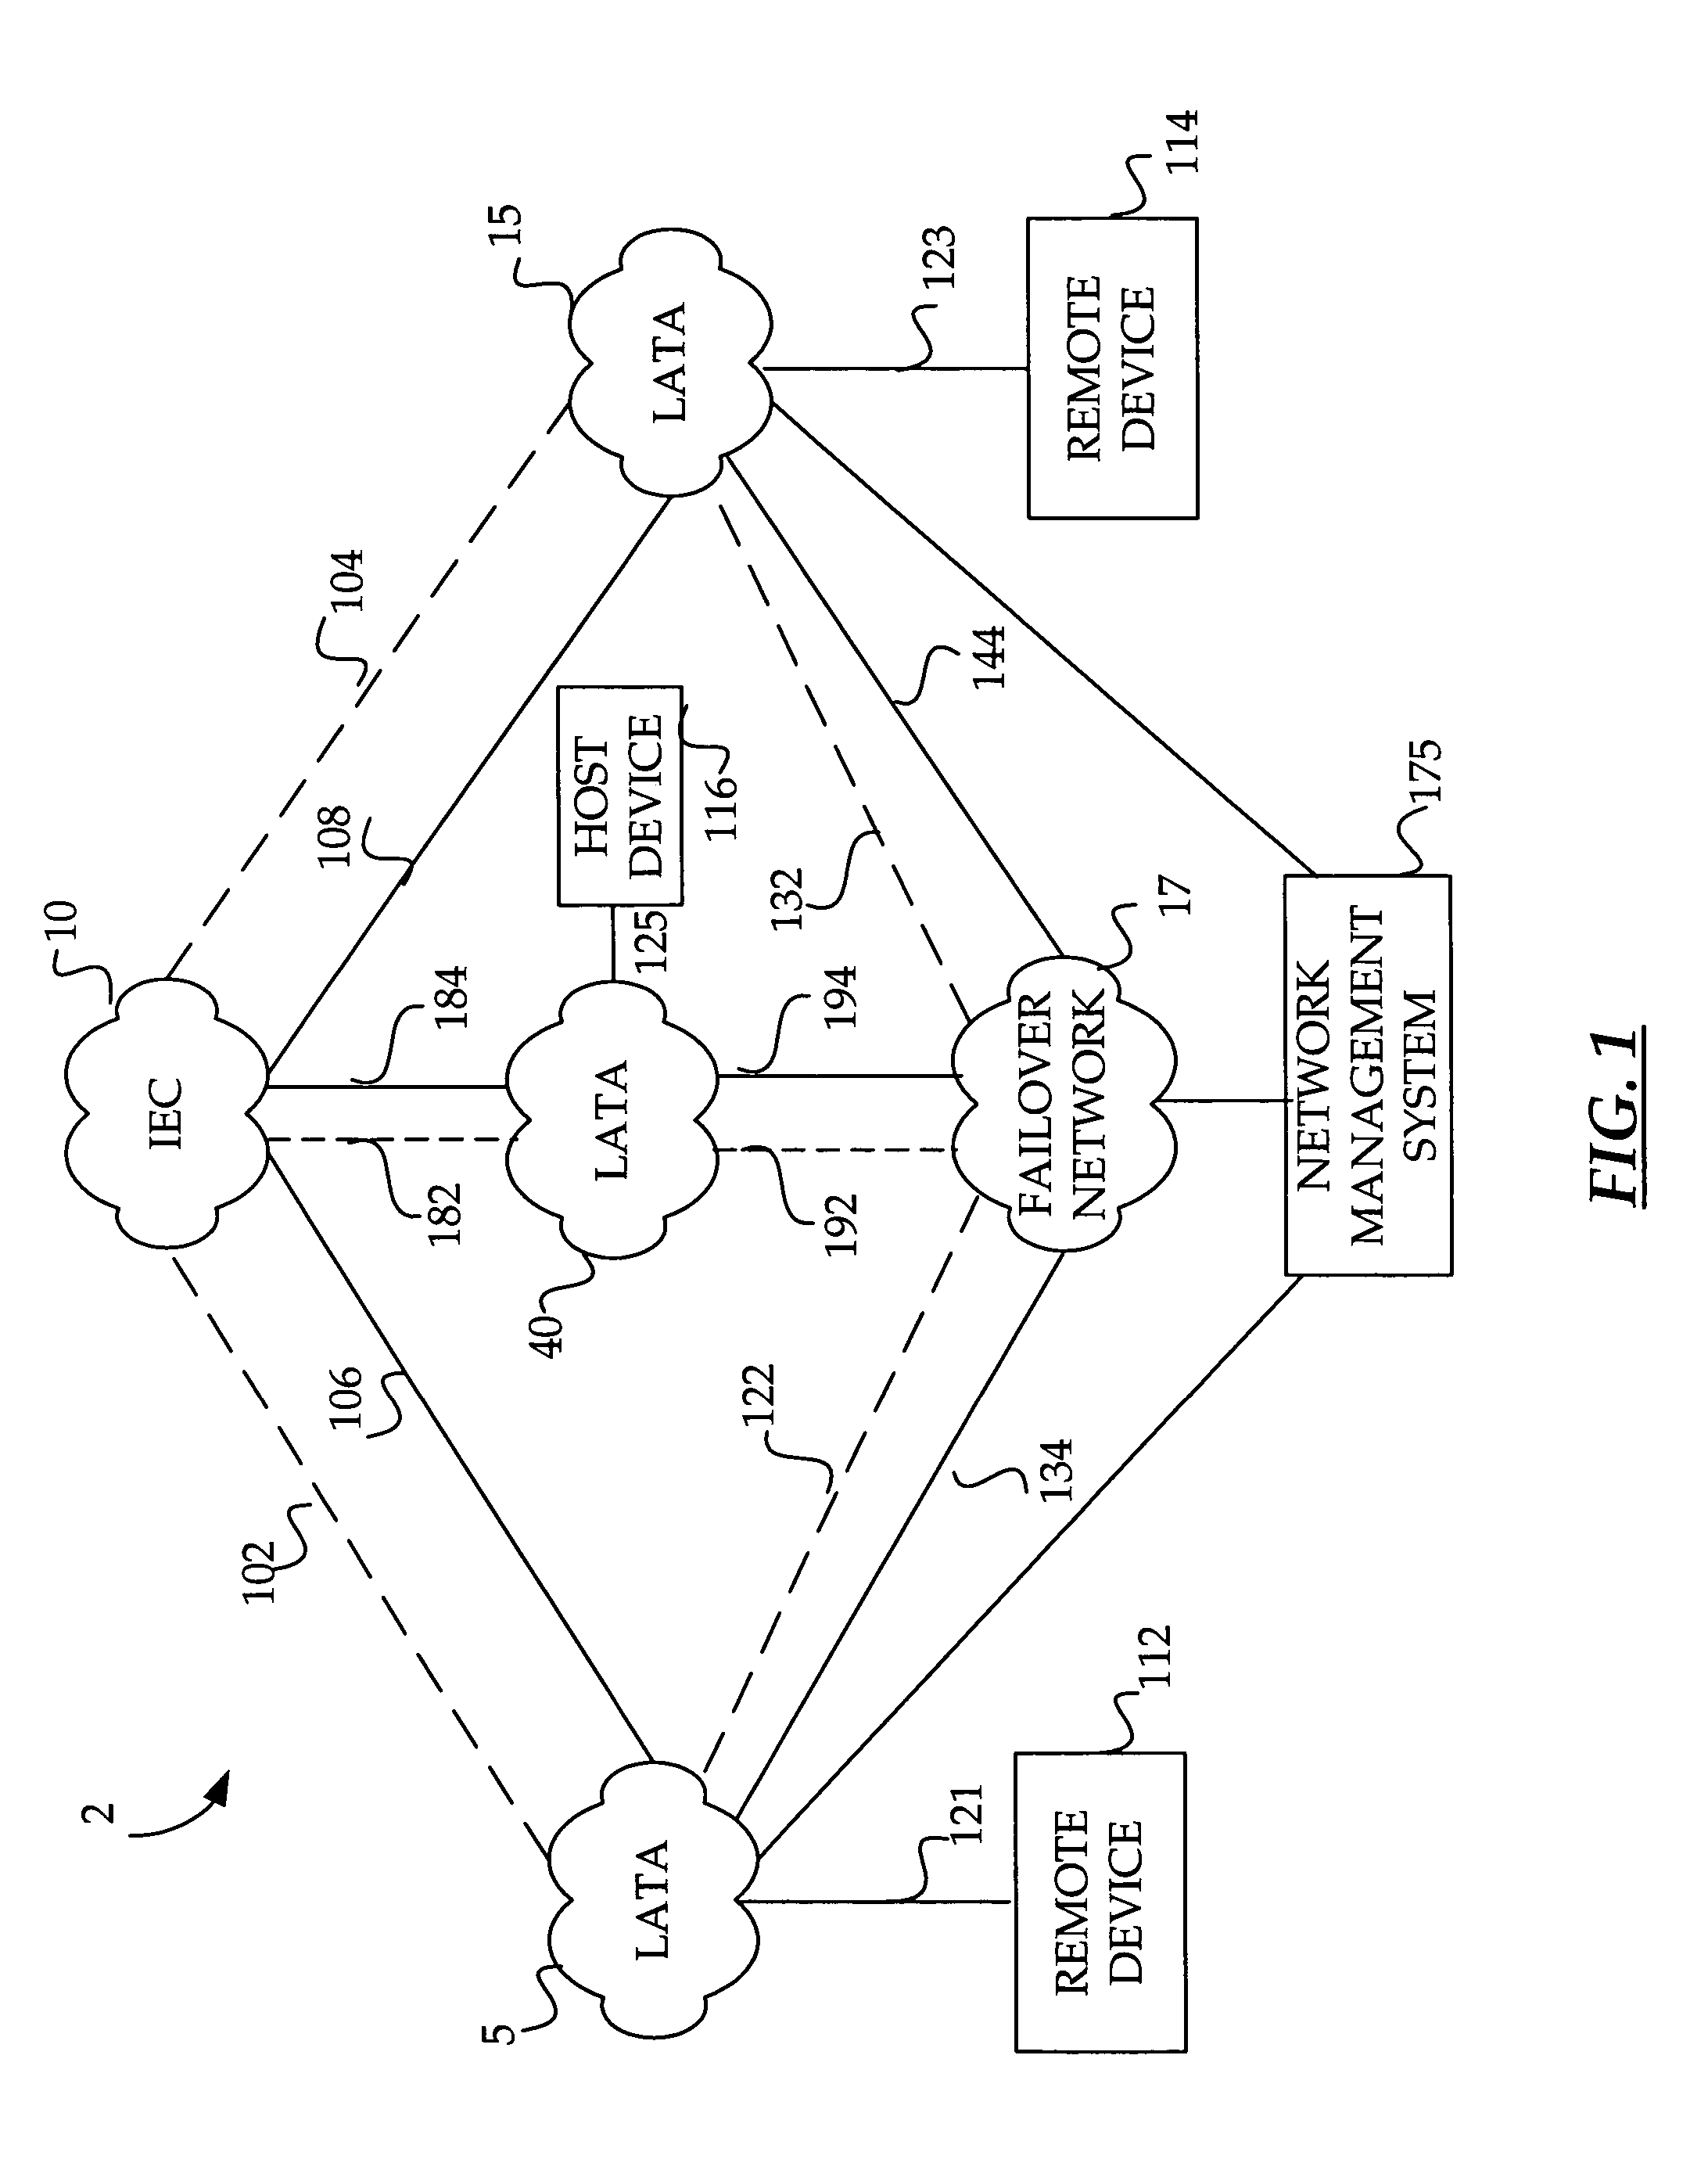 Method and system for on demand selective rerouting of logical circuit data in a data network